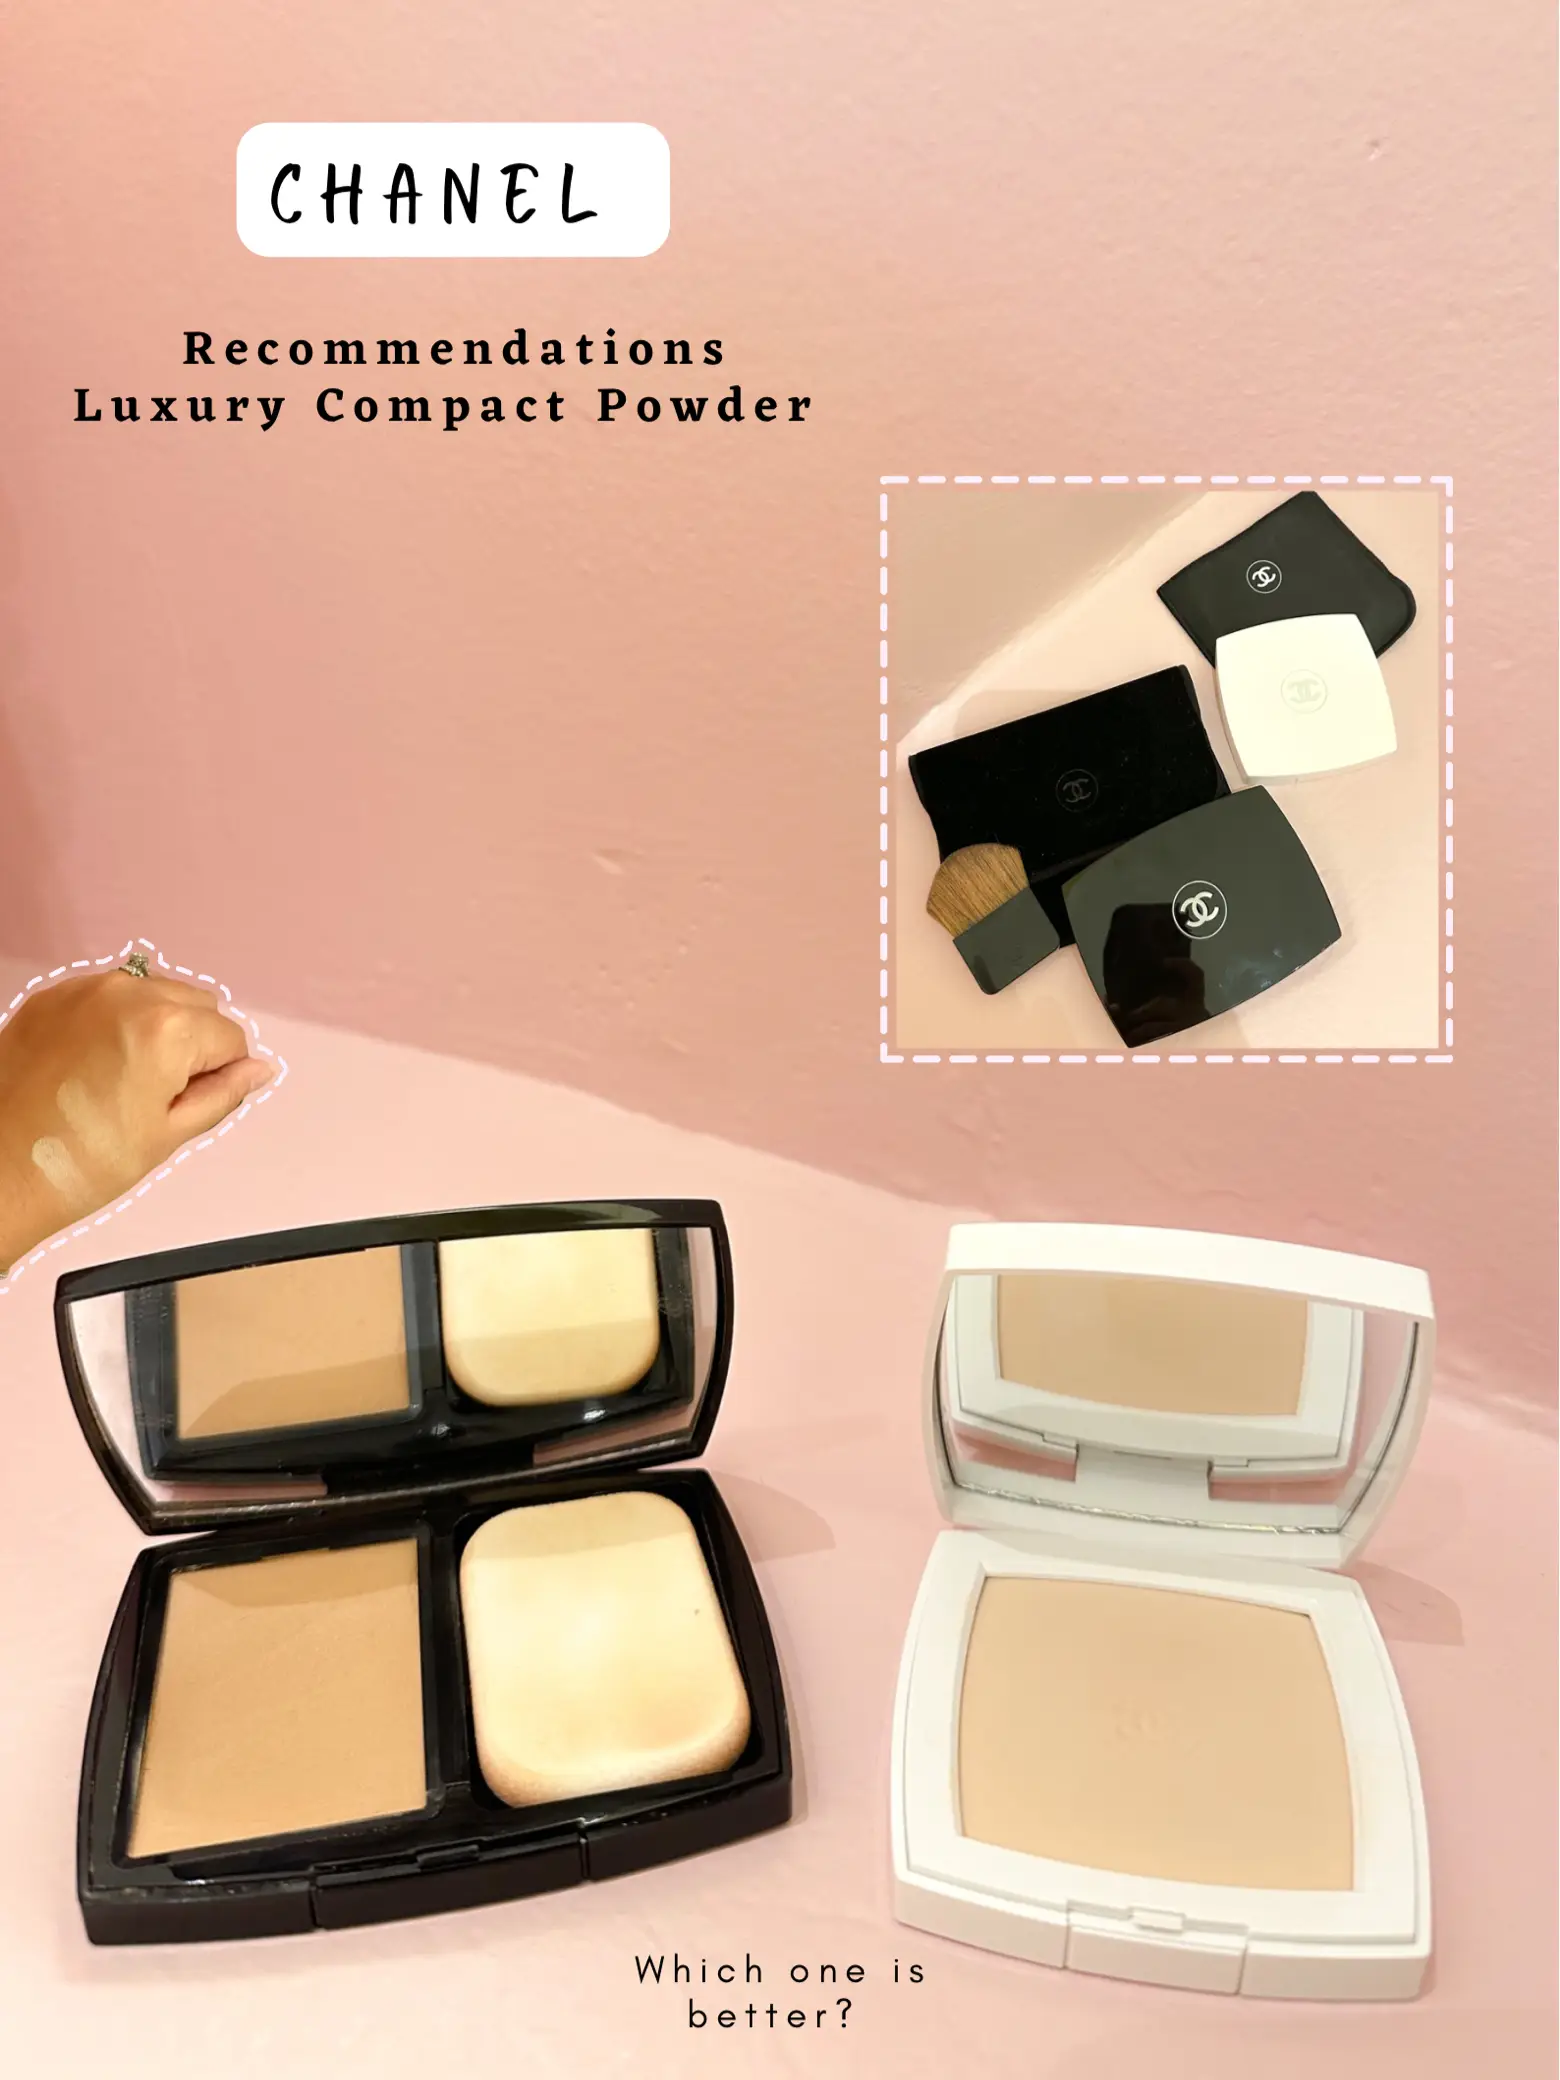 CHANEL LE BLANC OIL-IN-CREAM COMPACT FOUNDATION WHITENING